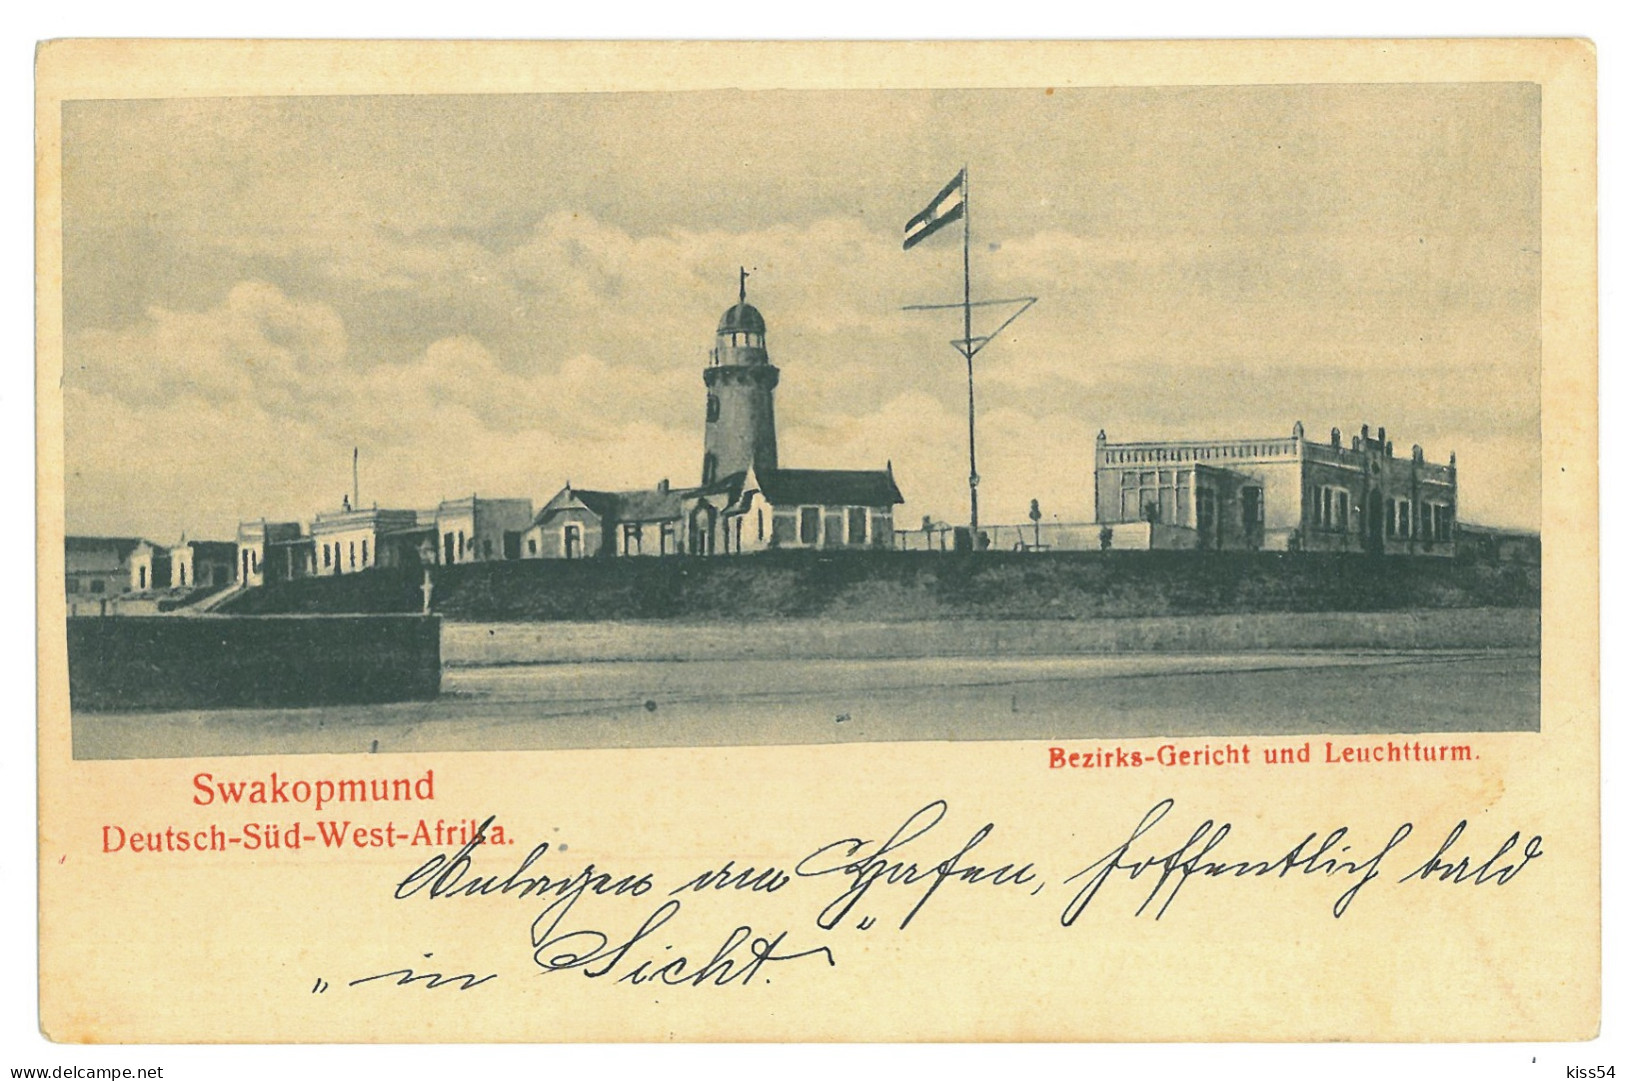 NAM 8 - 23807 SWAKOPMUND, The Courthouse And The Lighthouse D.S.W. Afrika, Namibia - Old Postcard - Unused - Namibië